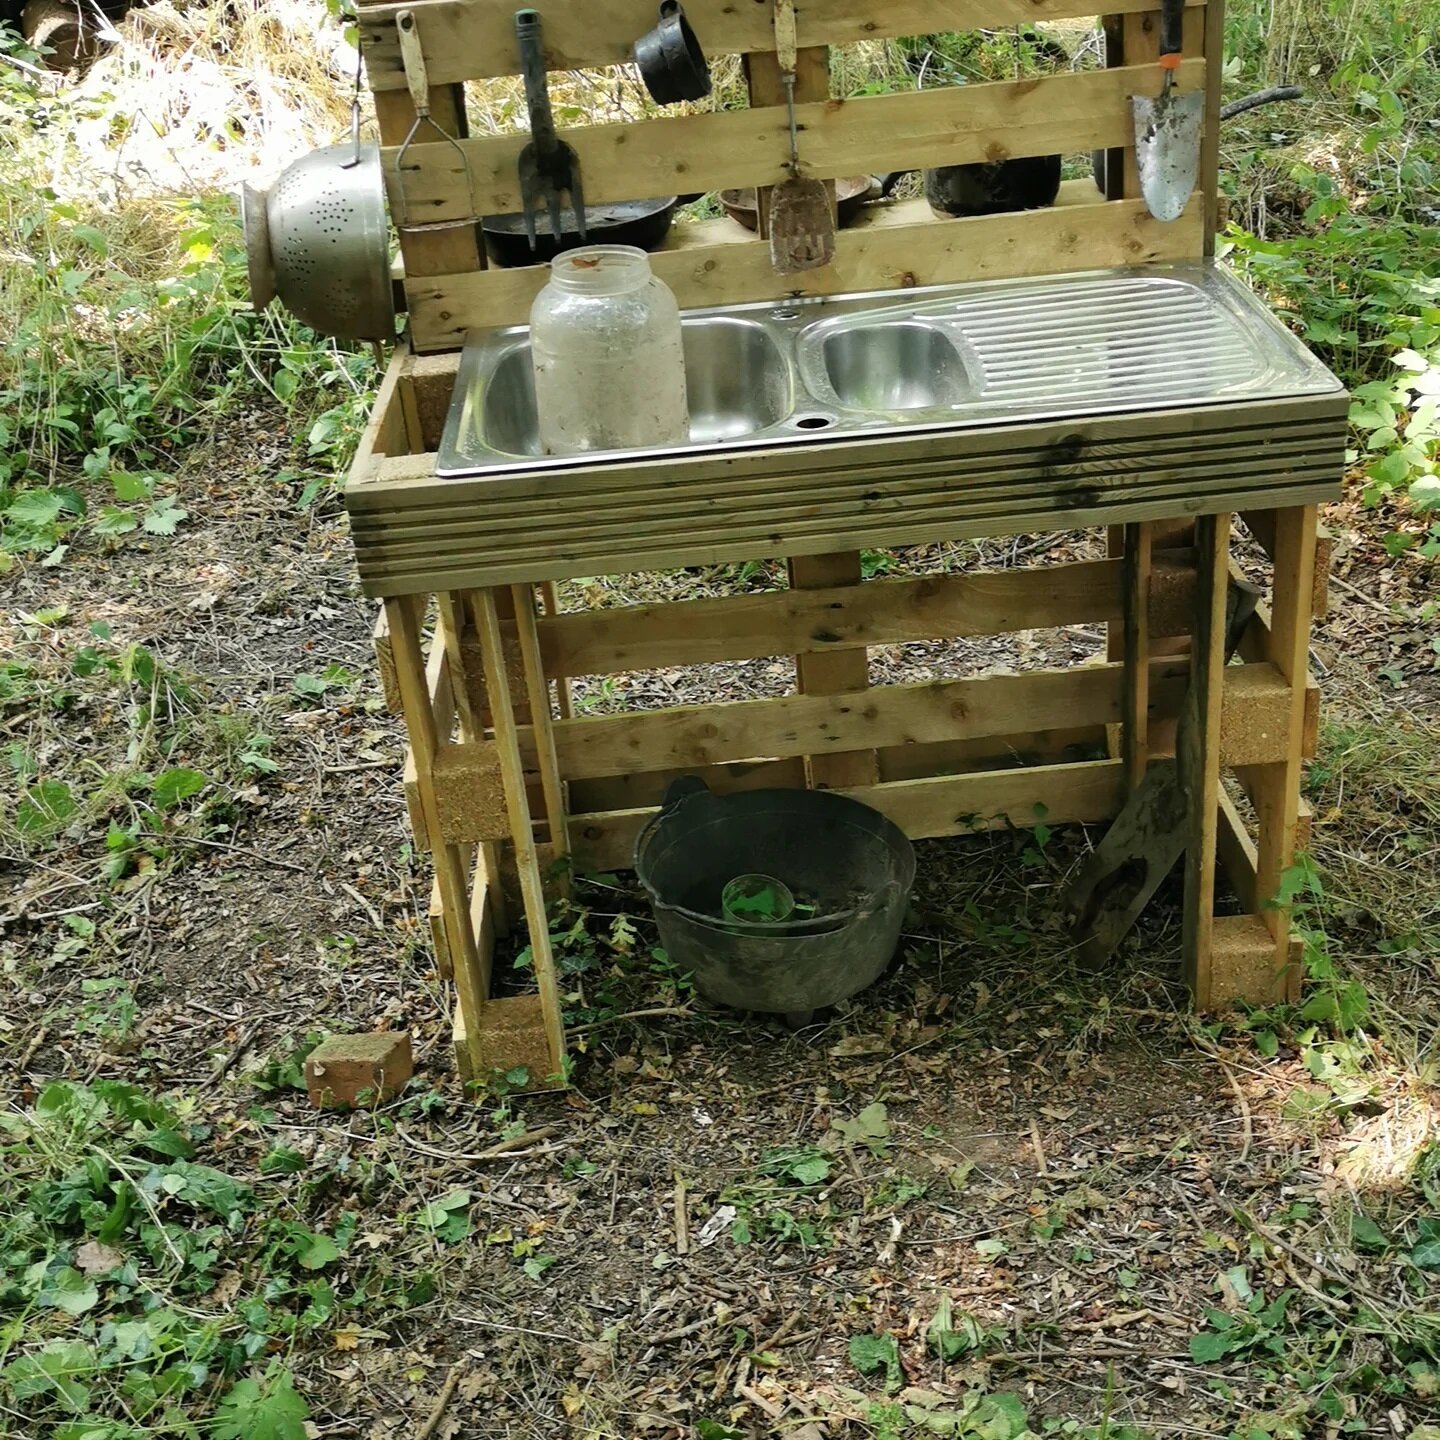 New mud kitchen ready for some messy play!